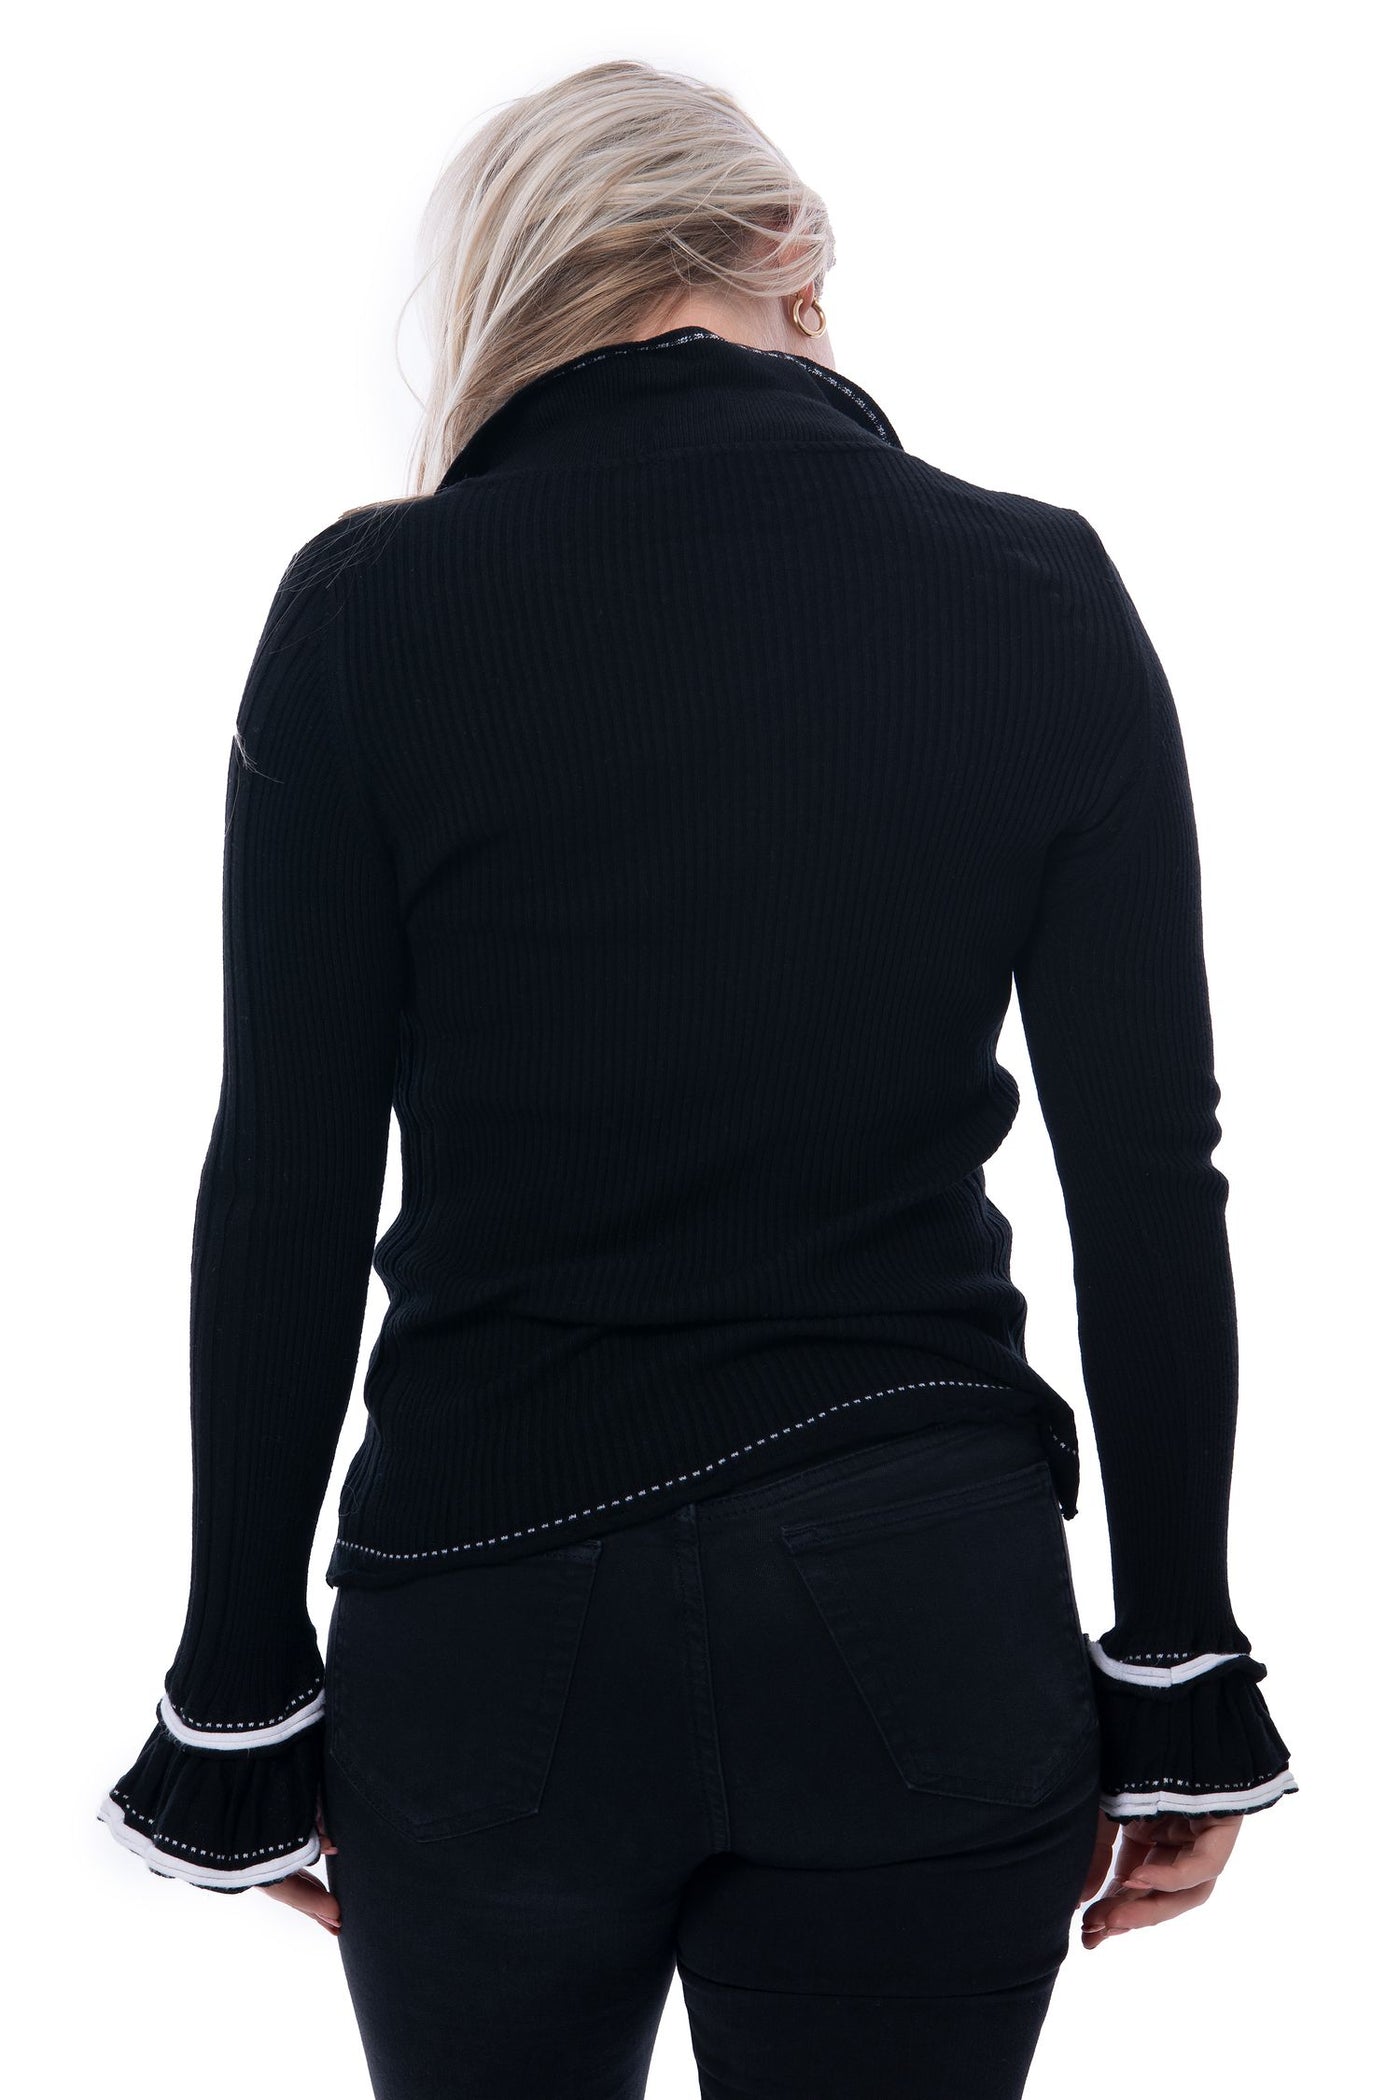 Anne Fontaine tight knit black jumper with frill and white trim